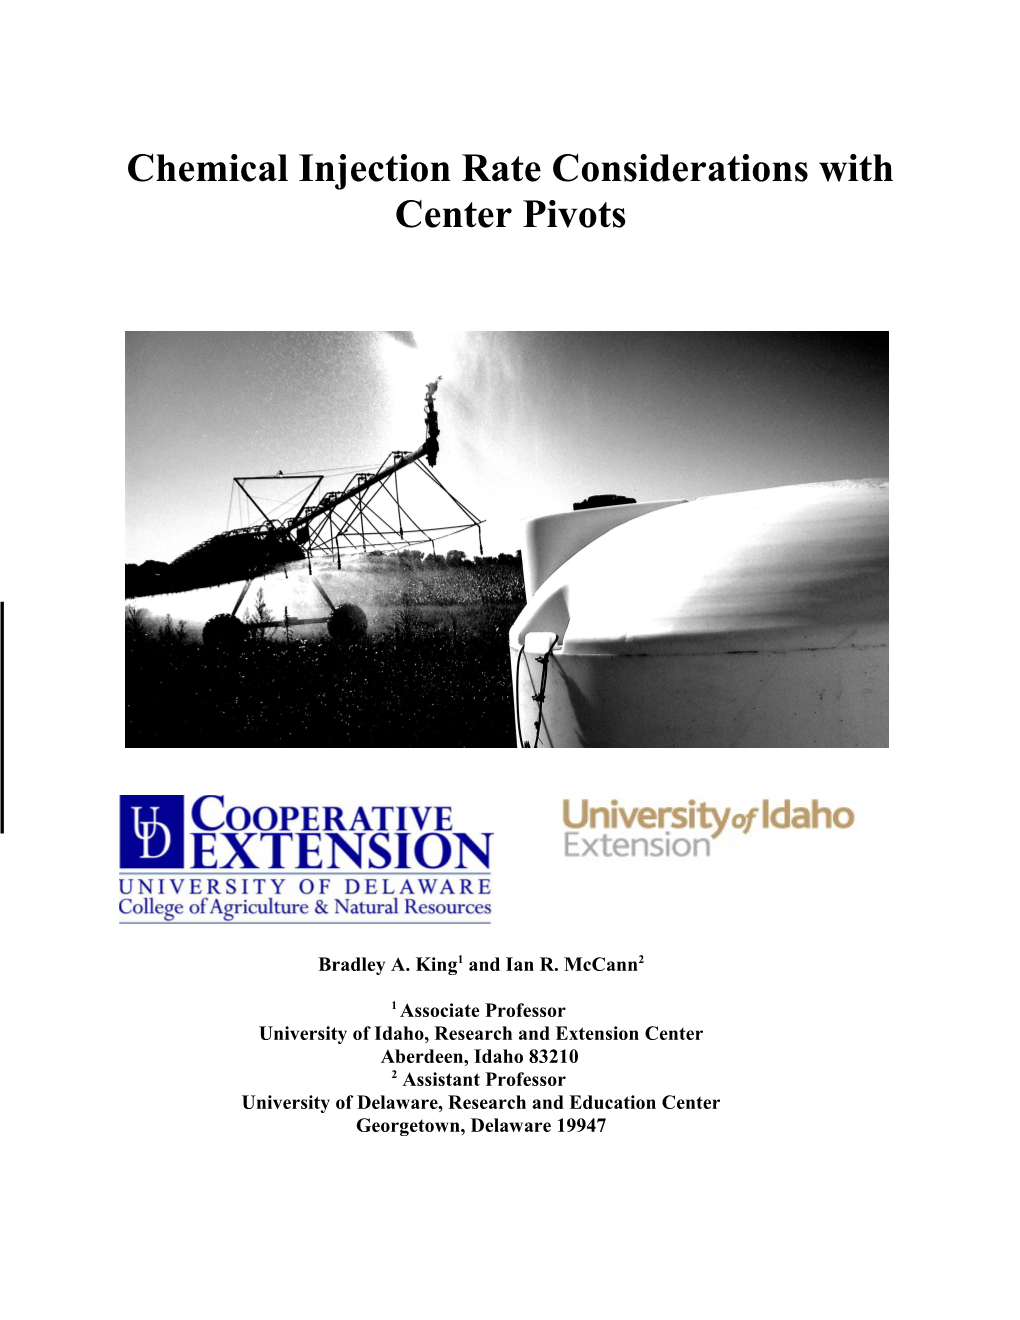 Chemical Injection Rate Considerations with Center Pivots